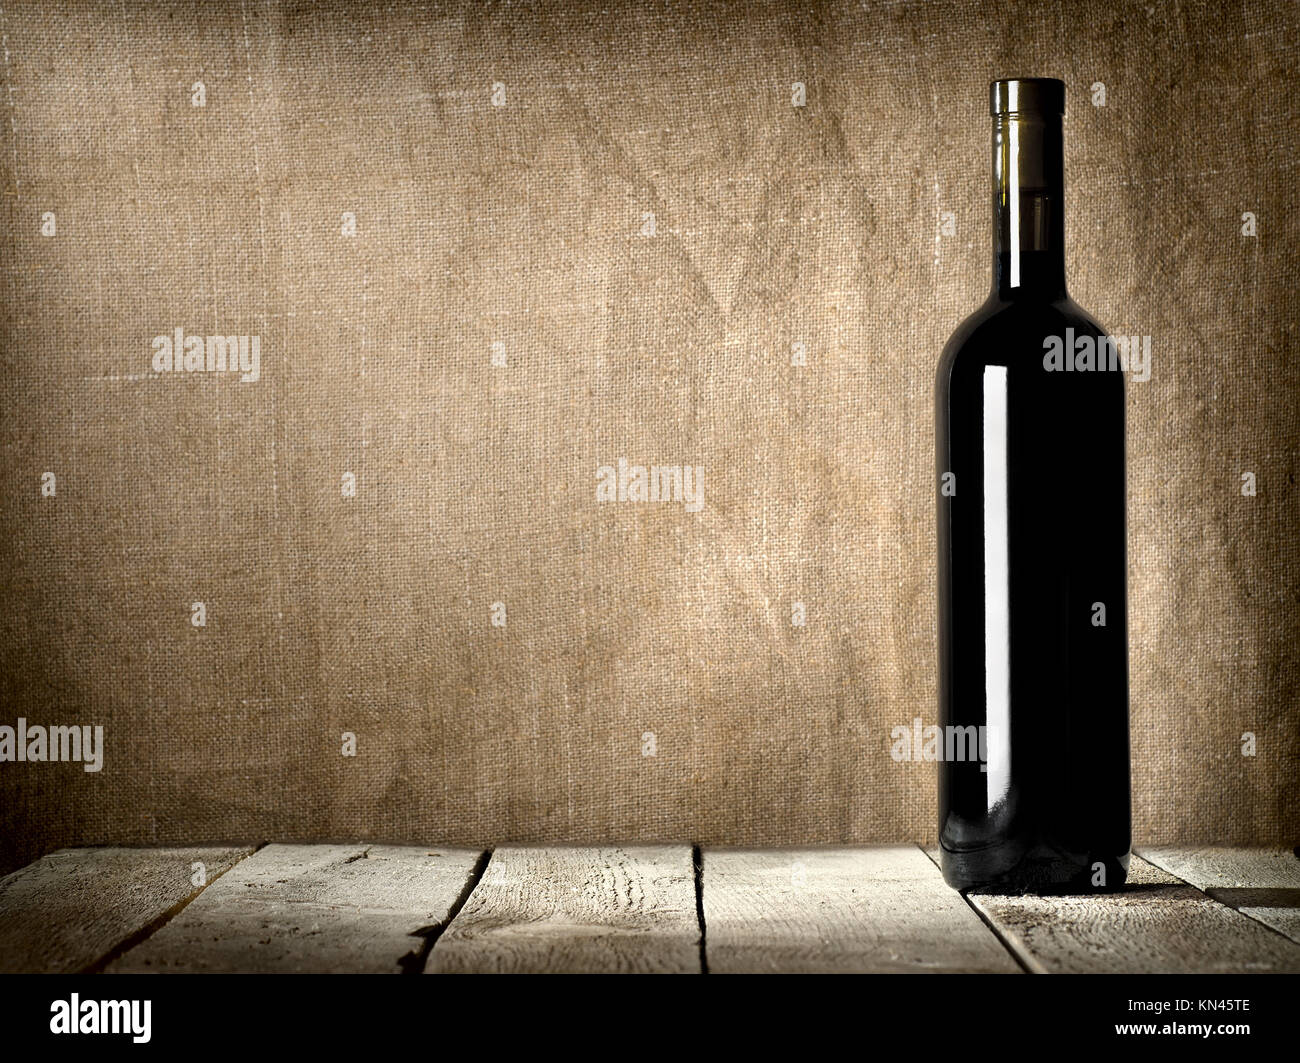 Black bottle of wine on the background of the canvas. Stock Photo